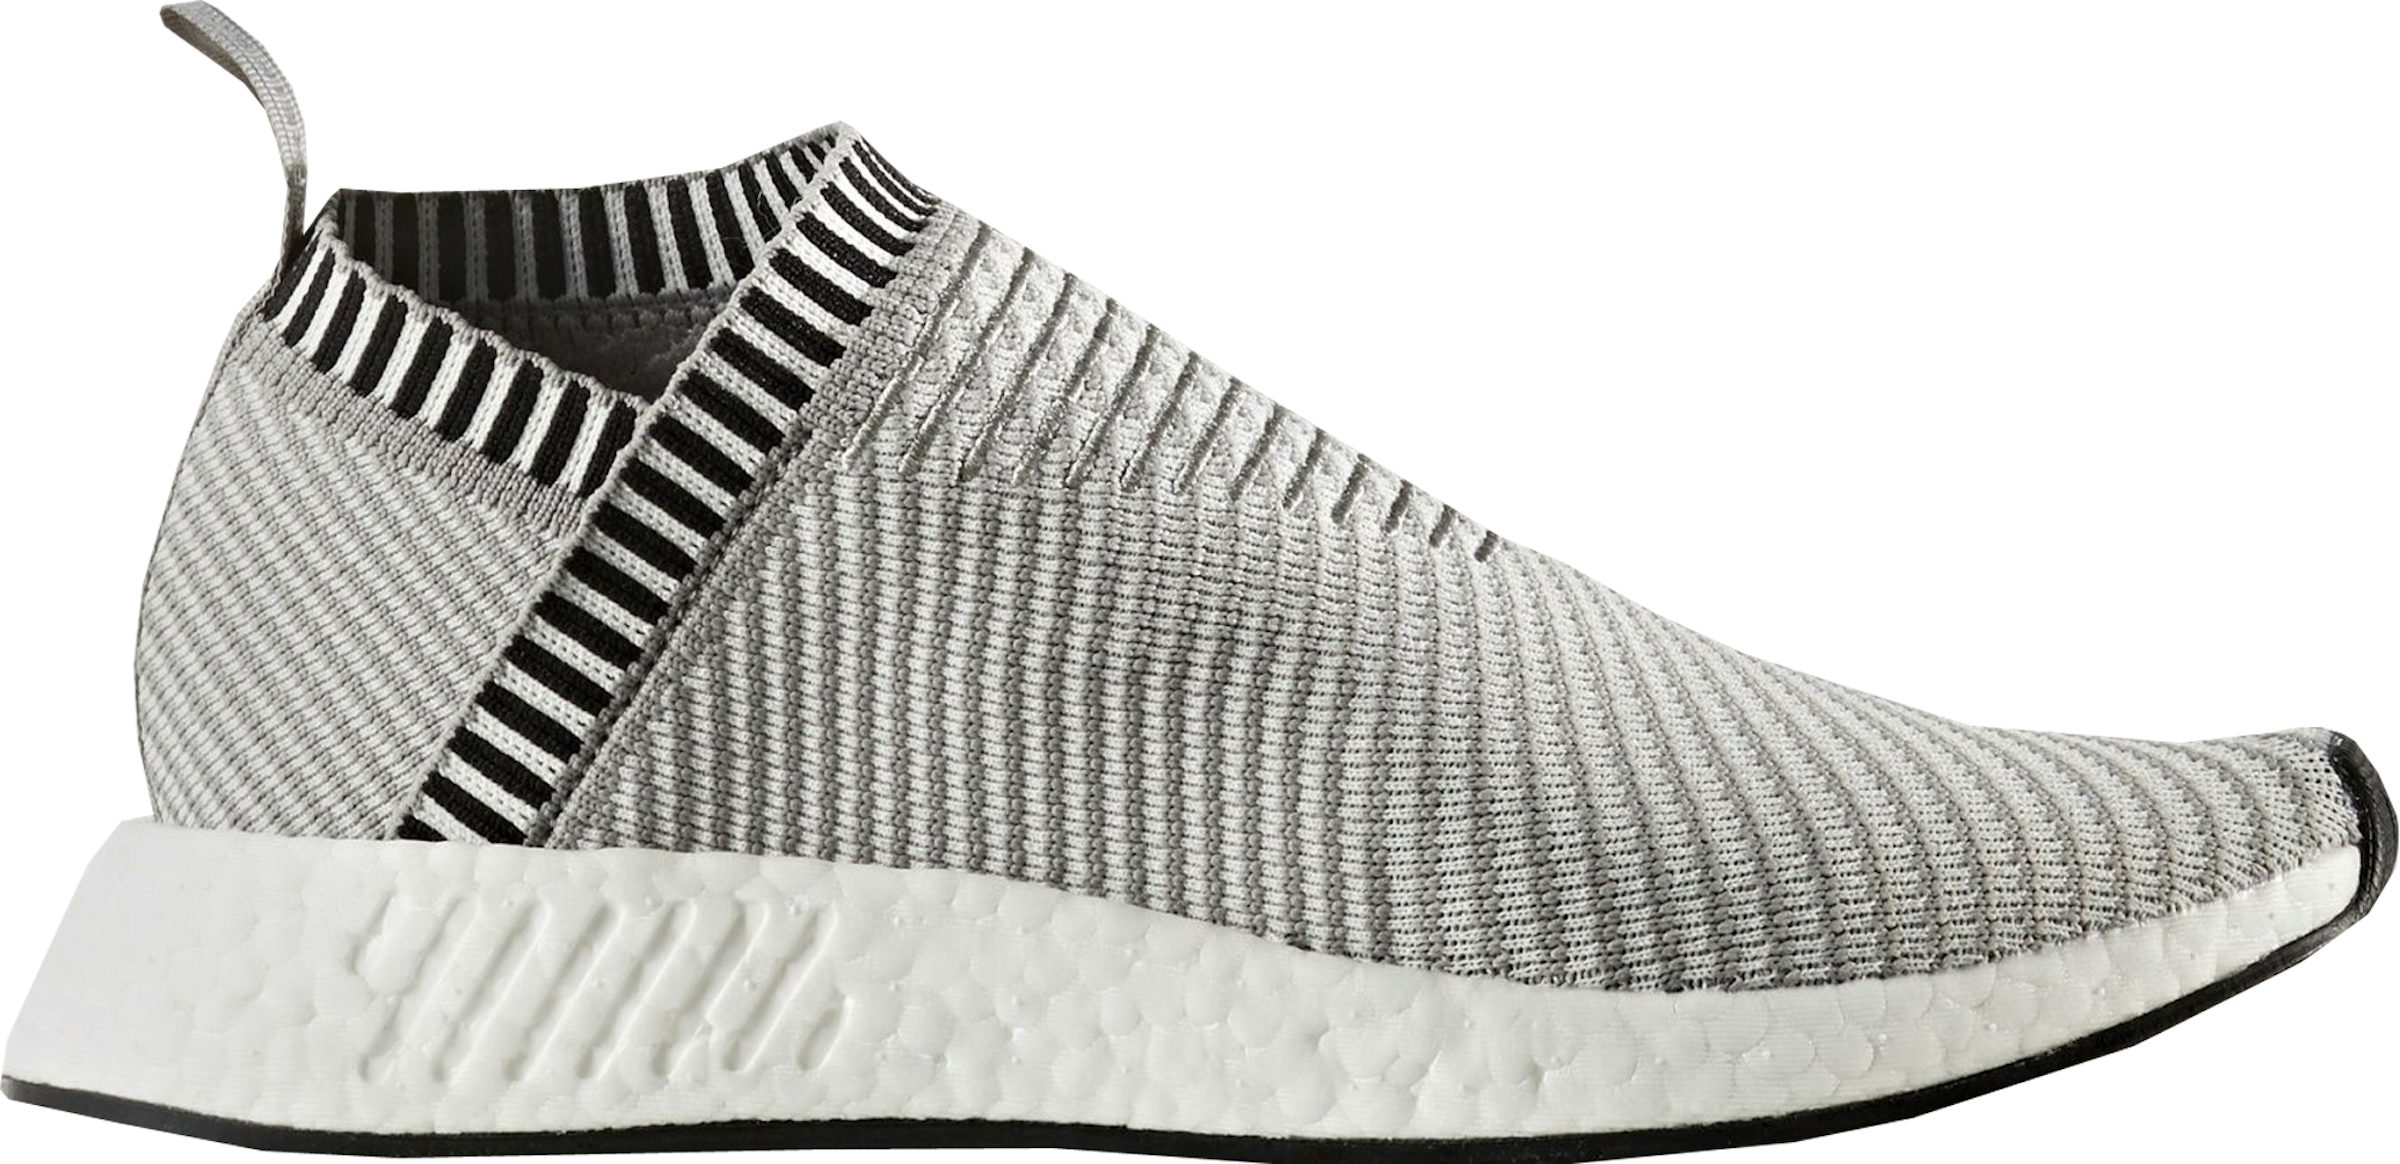 Buy adidas NMD Shoes New - StockX